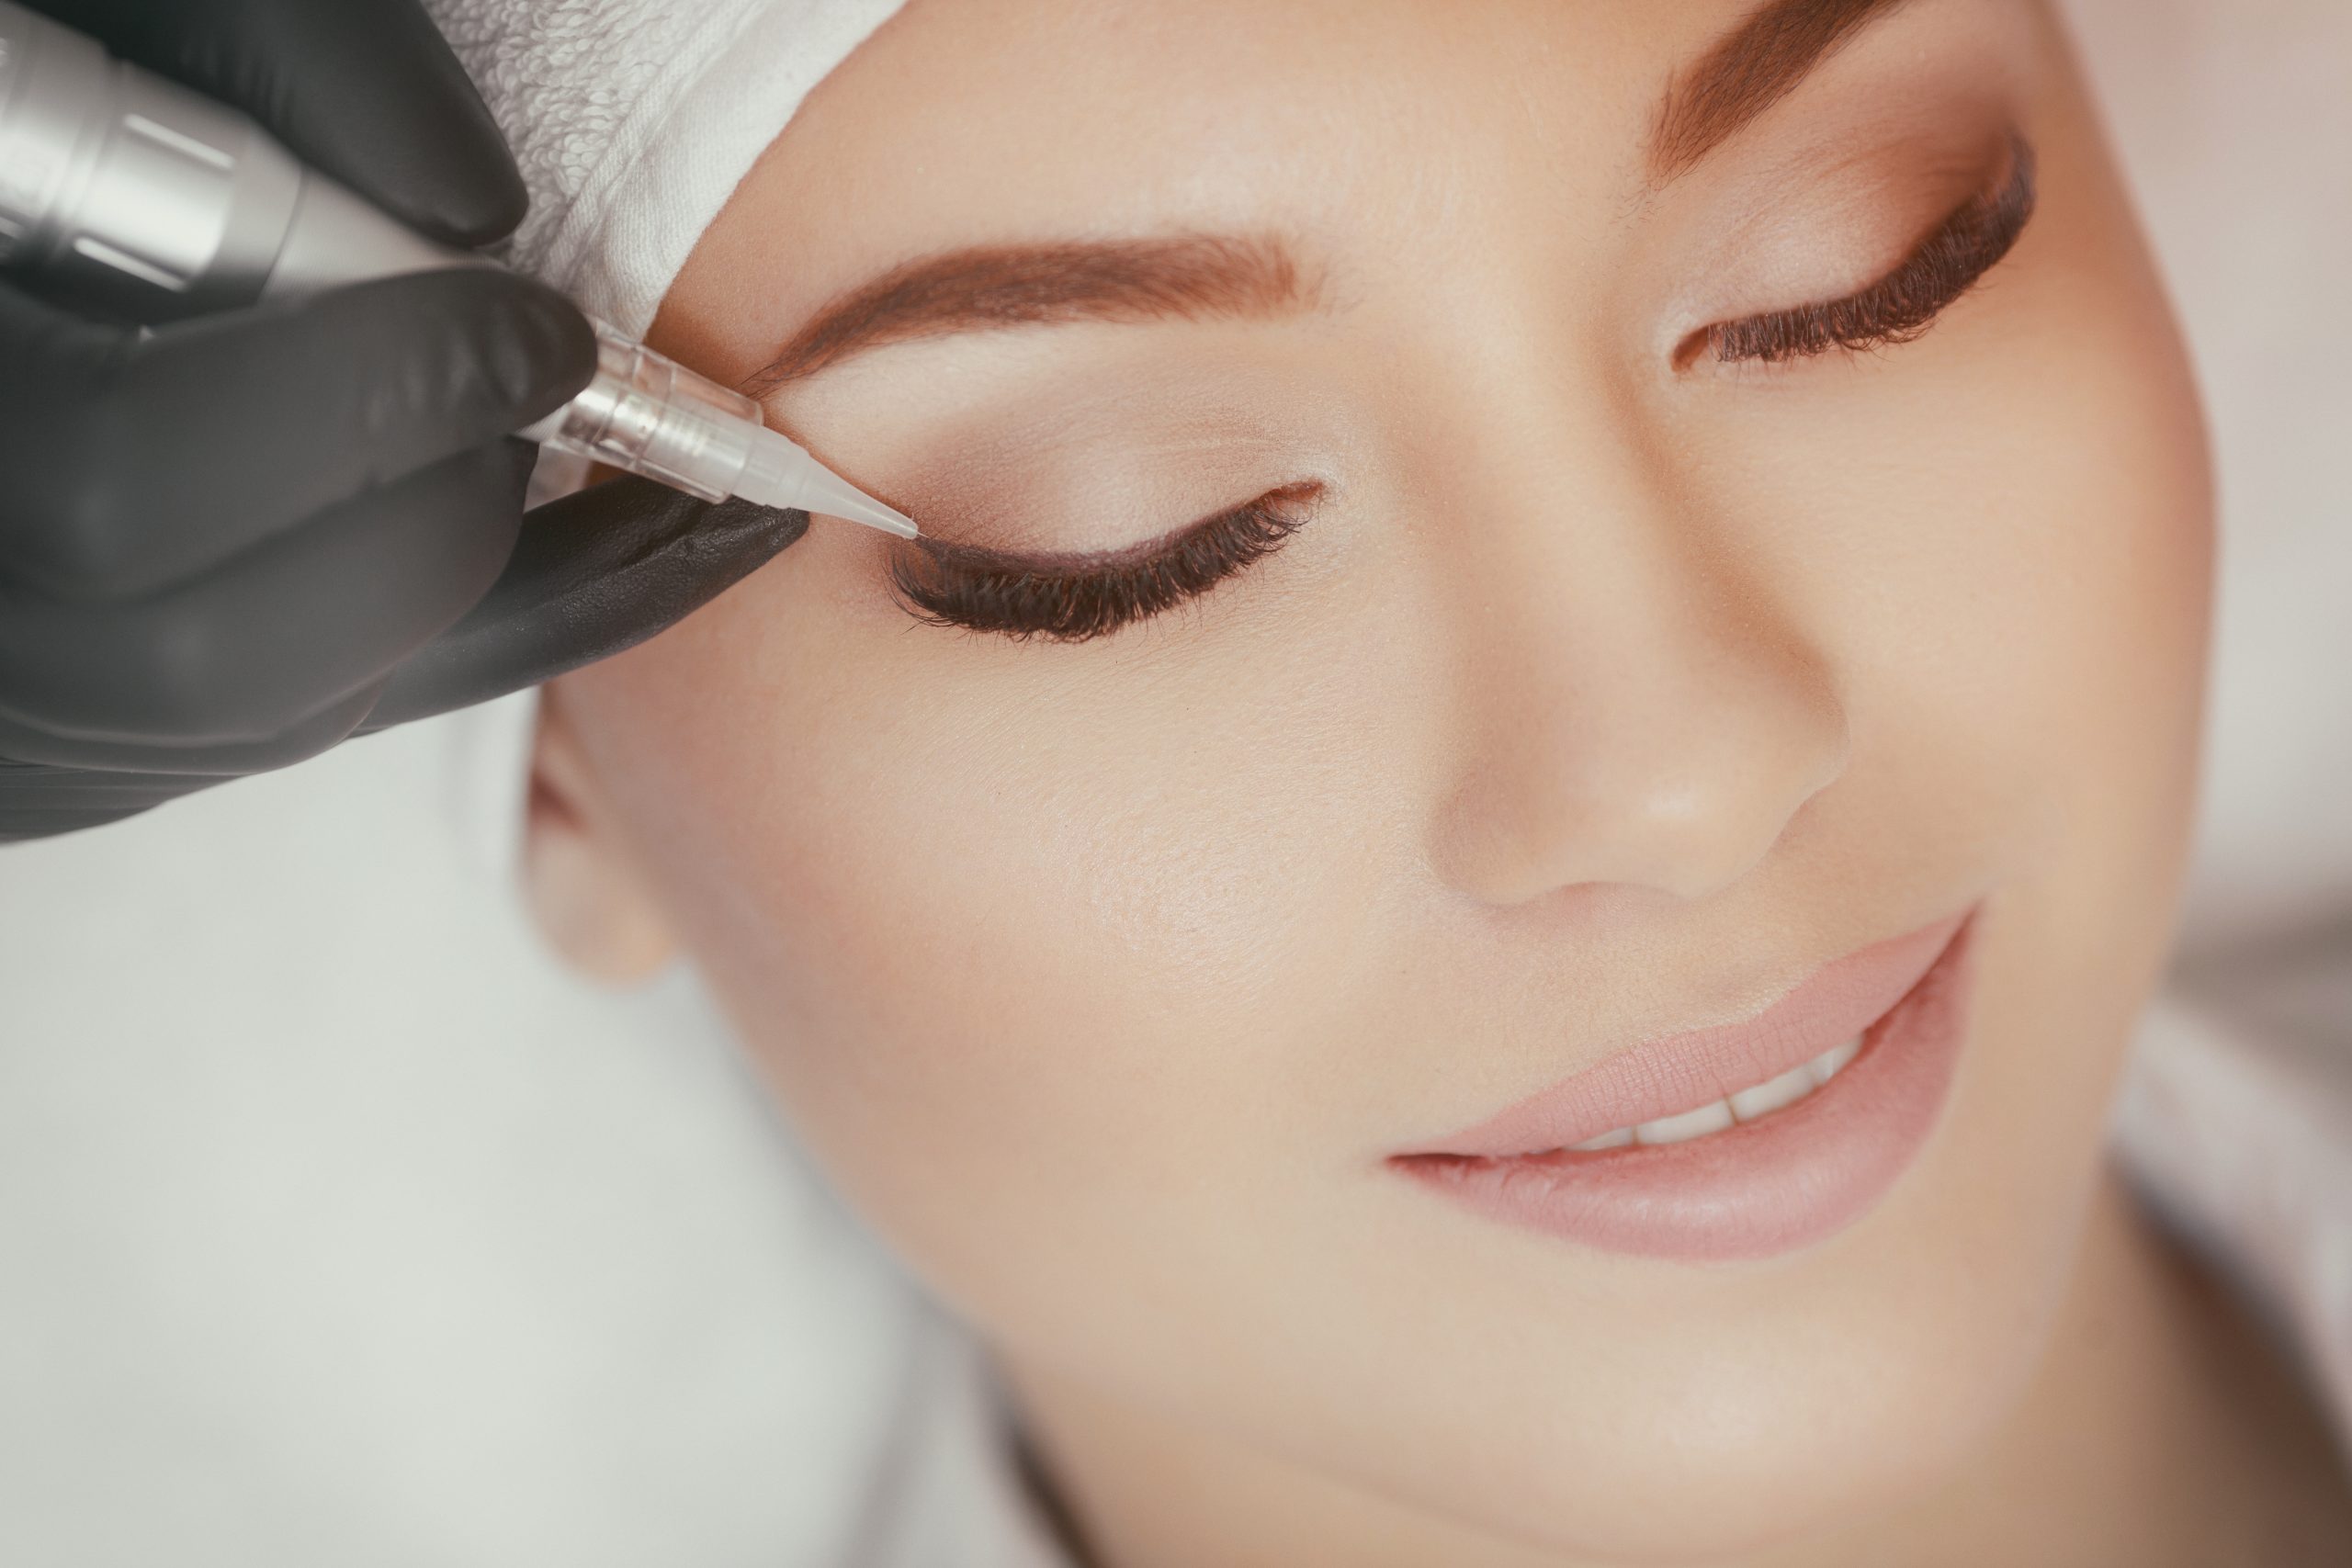 Eyeliner/Eyebrow Touch-up | One Skin Care Studio